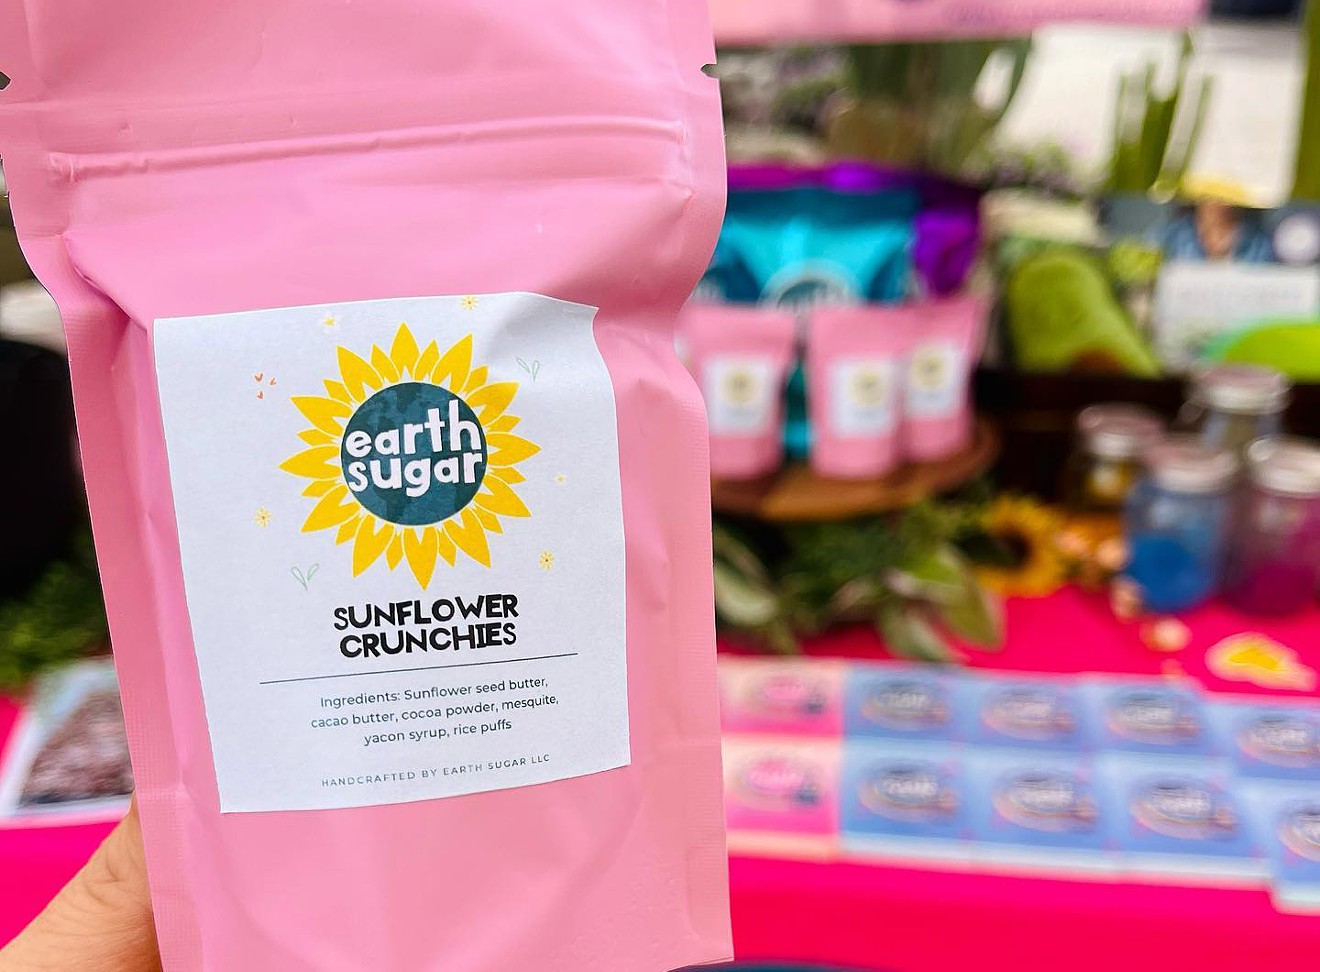 Earth Sugar's colorful packaging.